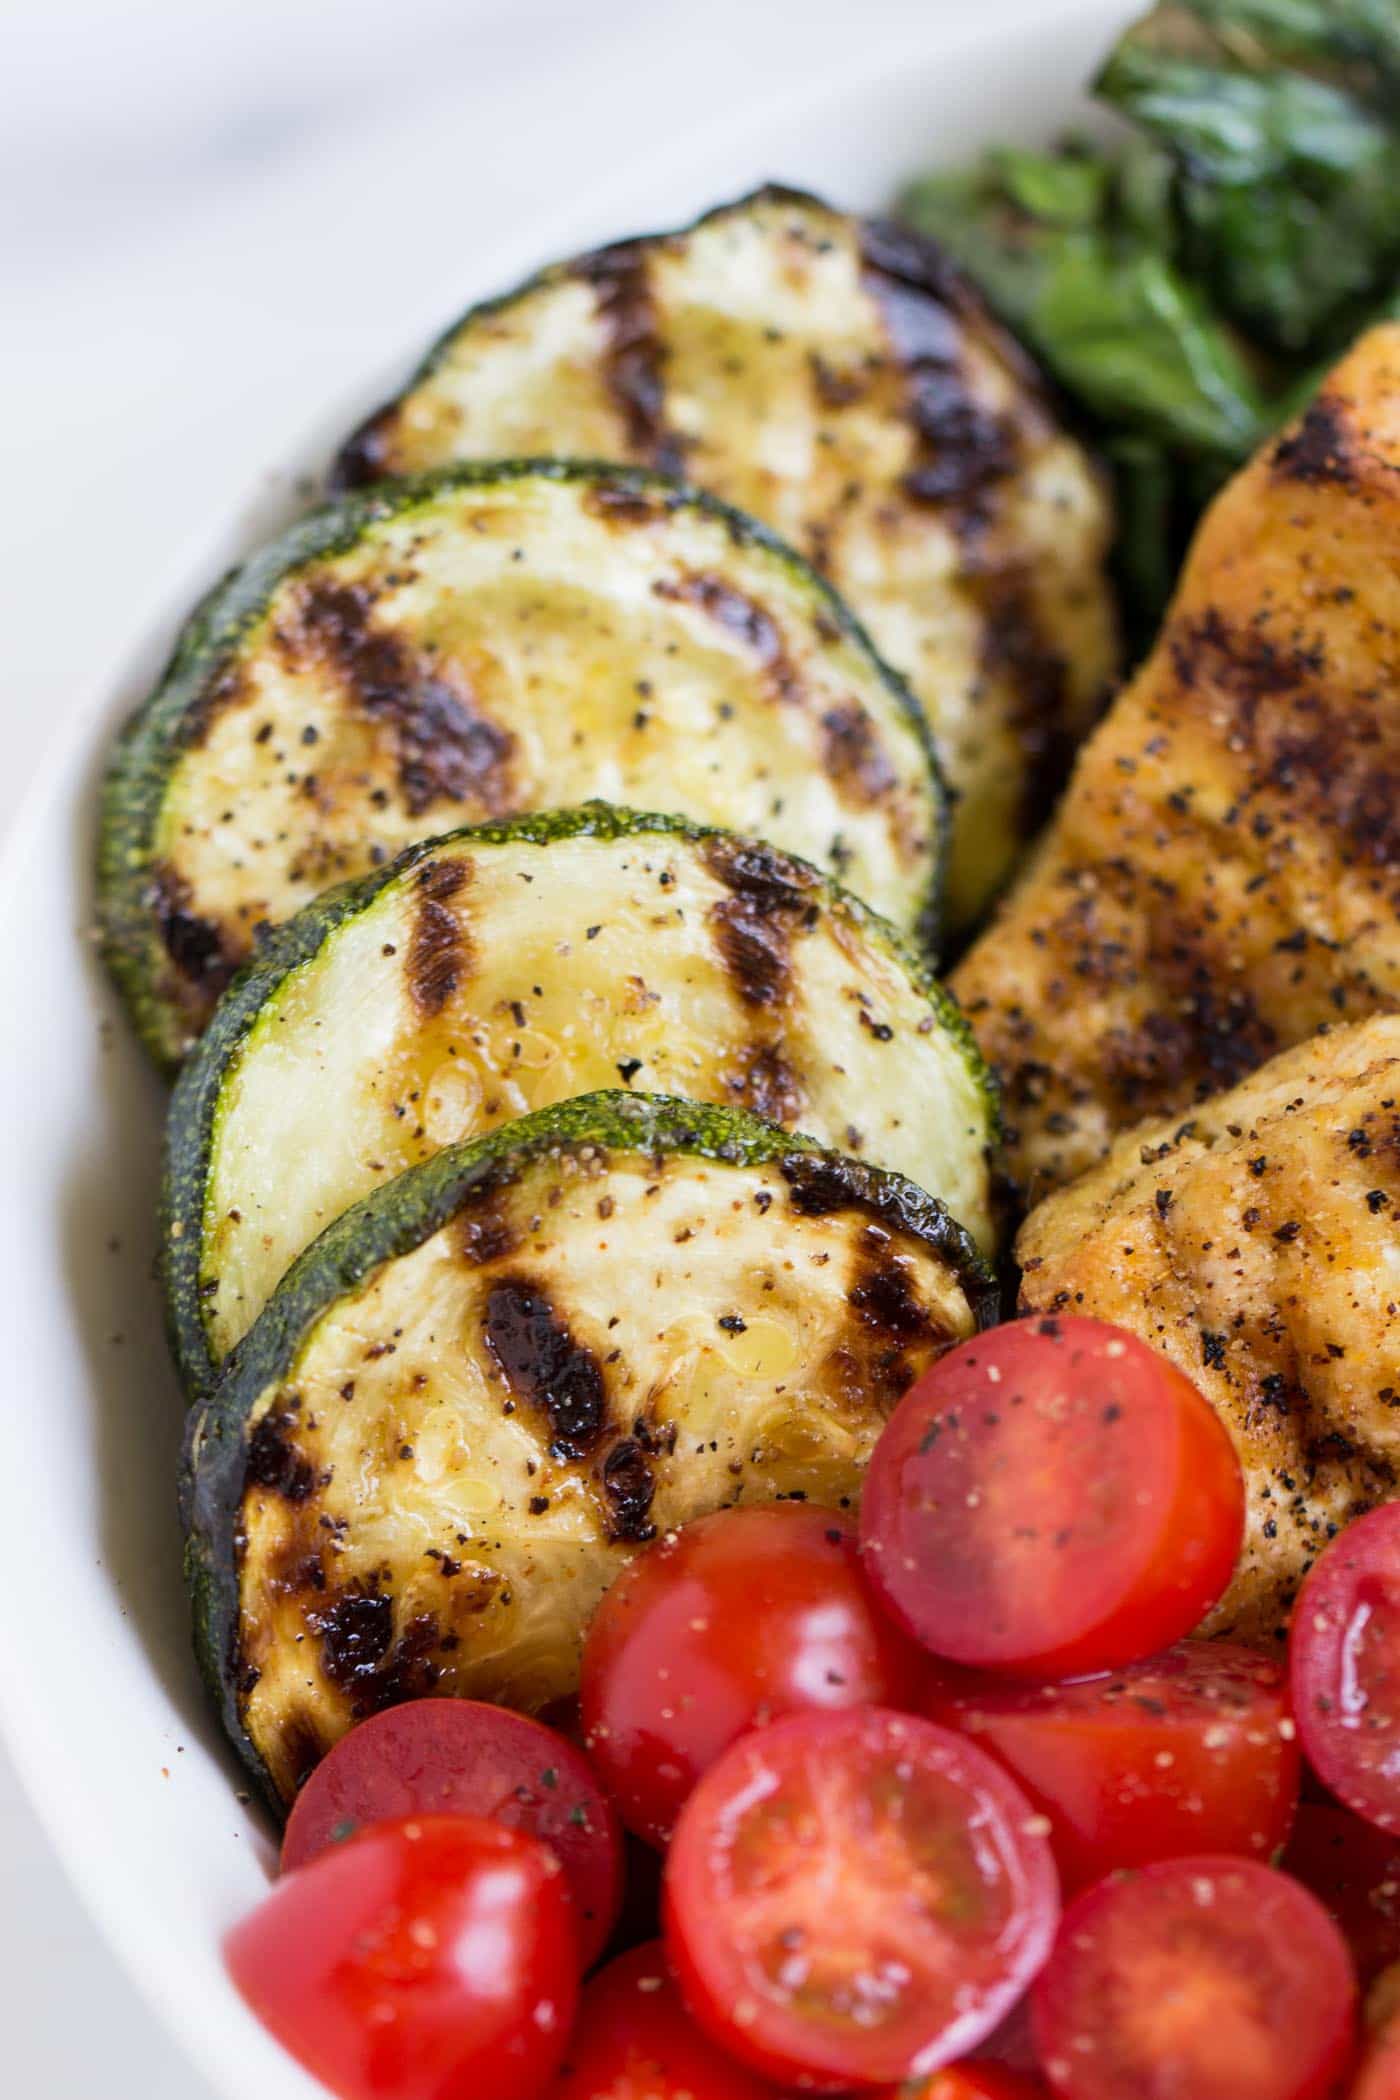 Perfectly grilled zucchini atop of delicious pesto quinoa bowl -- looks like the perfect dinner to me!